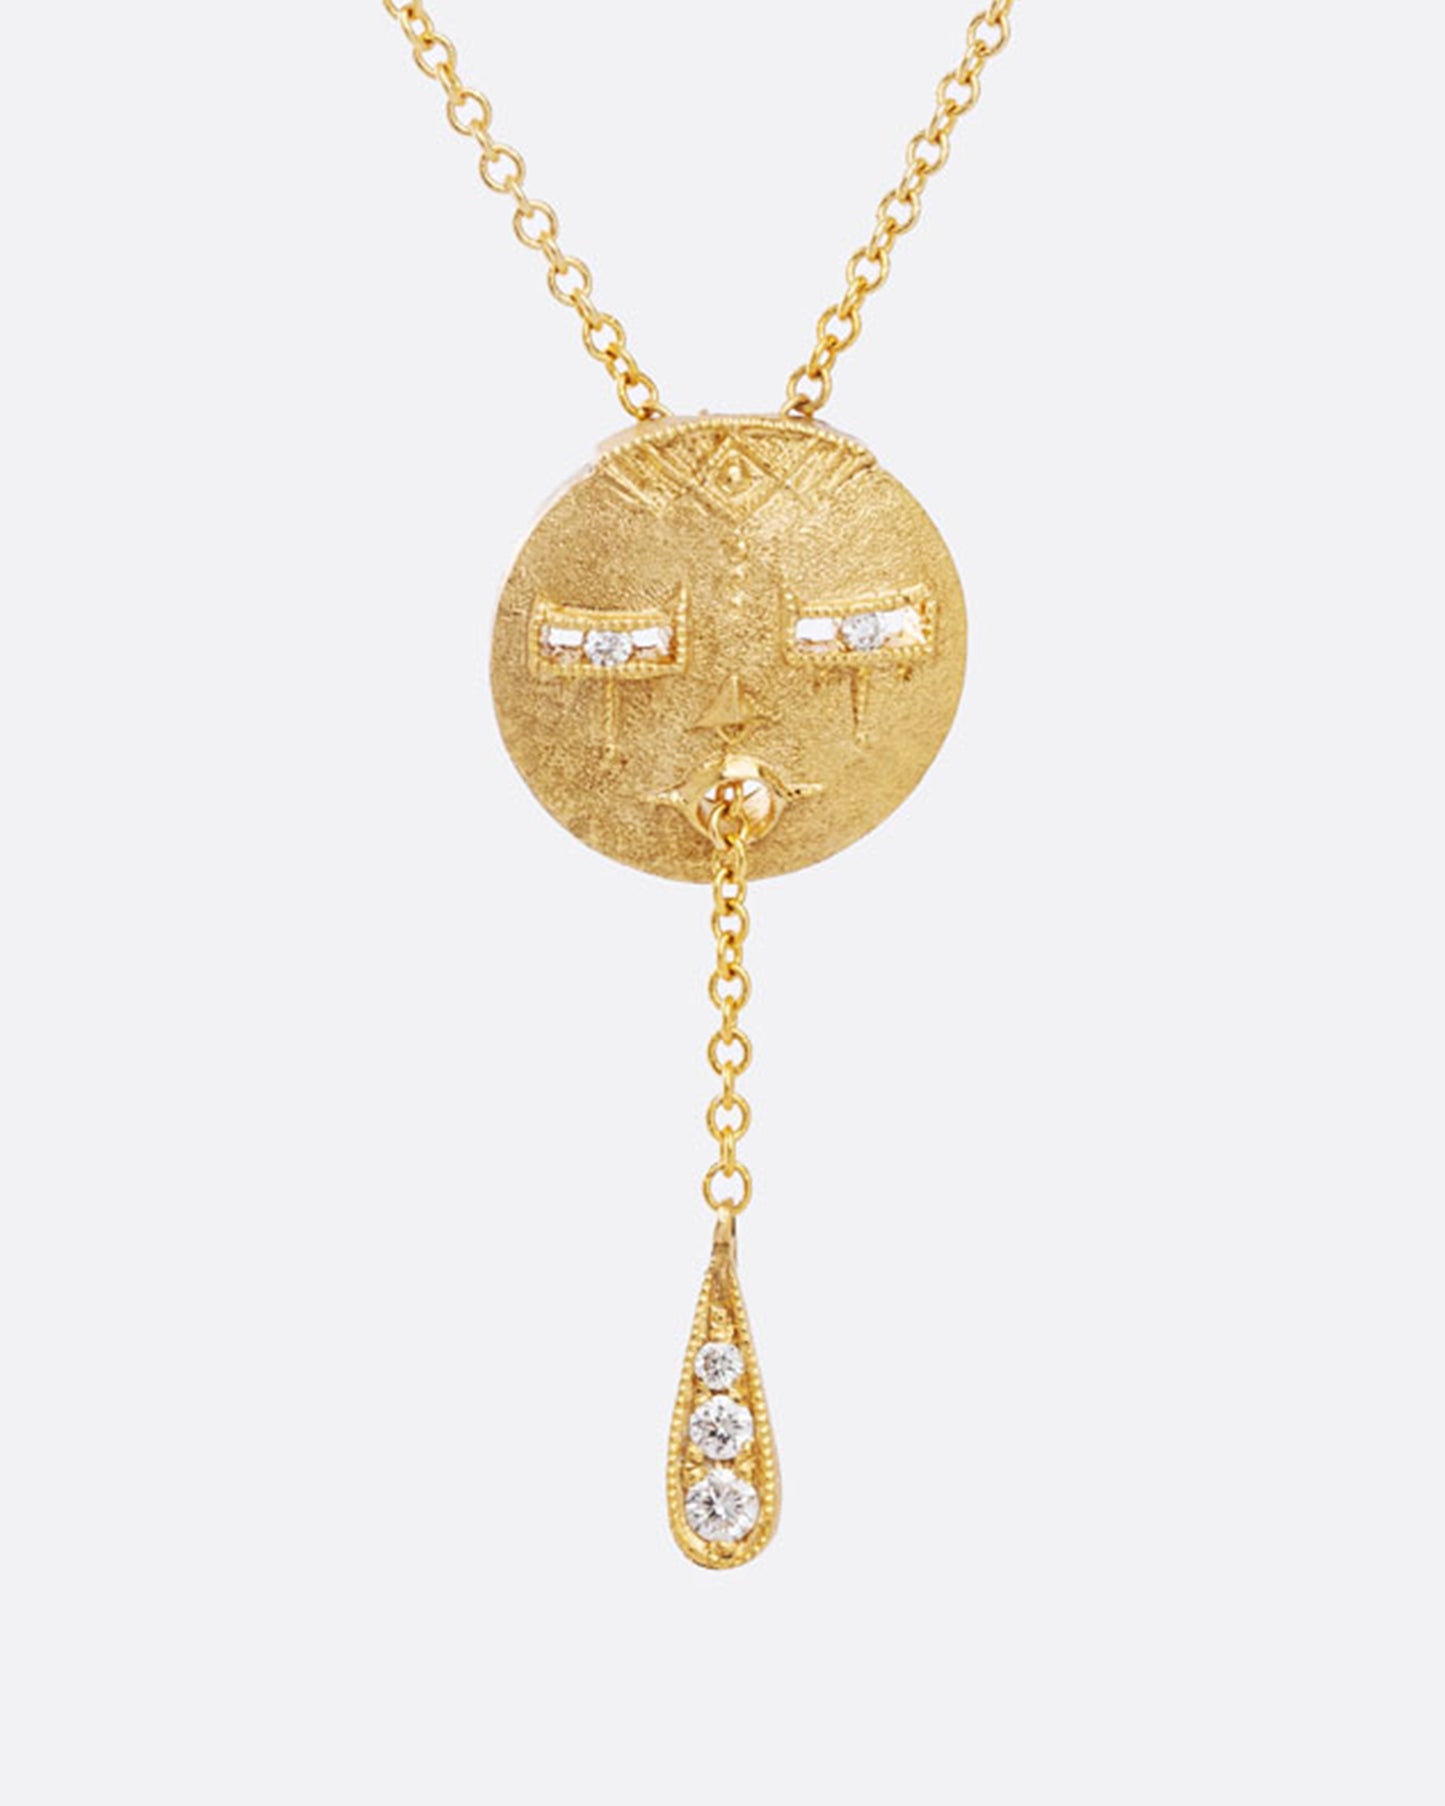 Yellow gold lariat necklace with carved face diamond eyes and a drop chain with a triplet of diamonds.